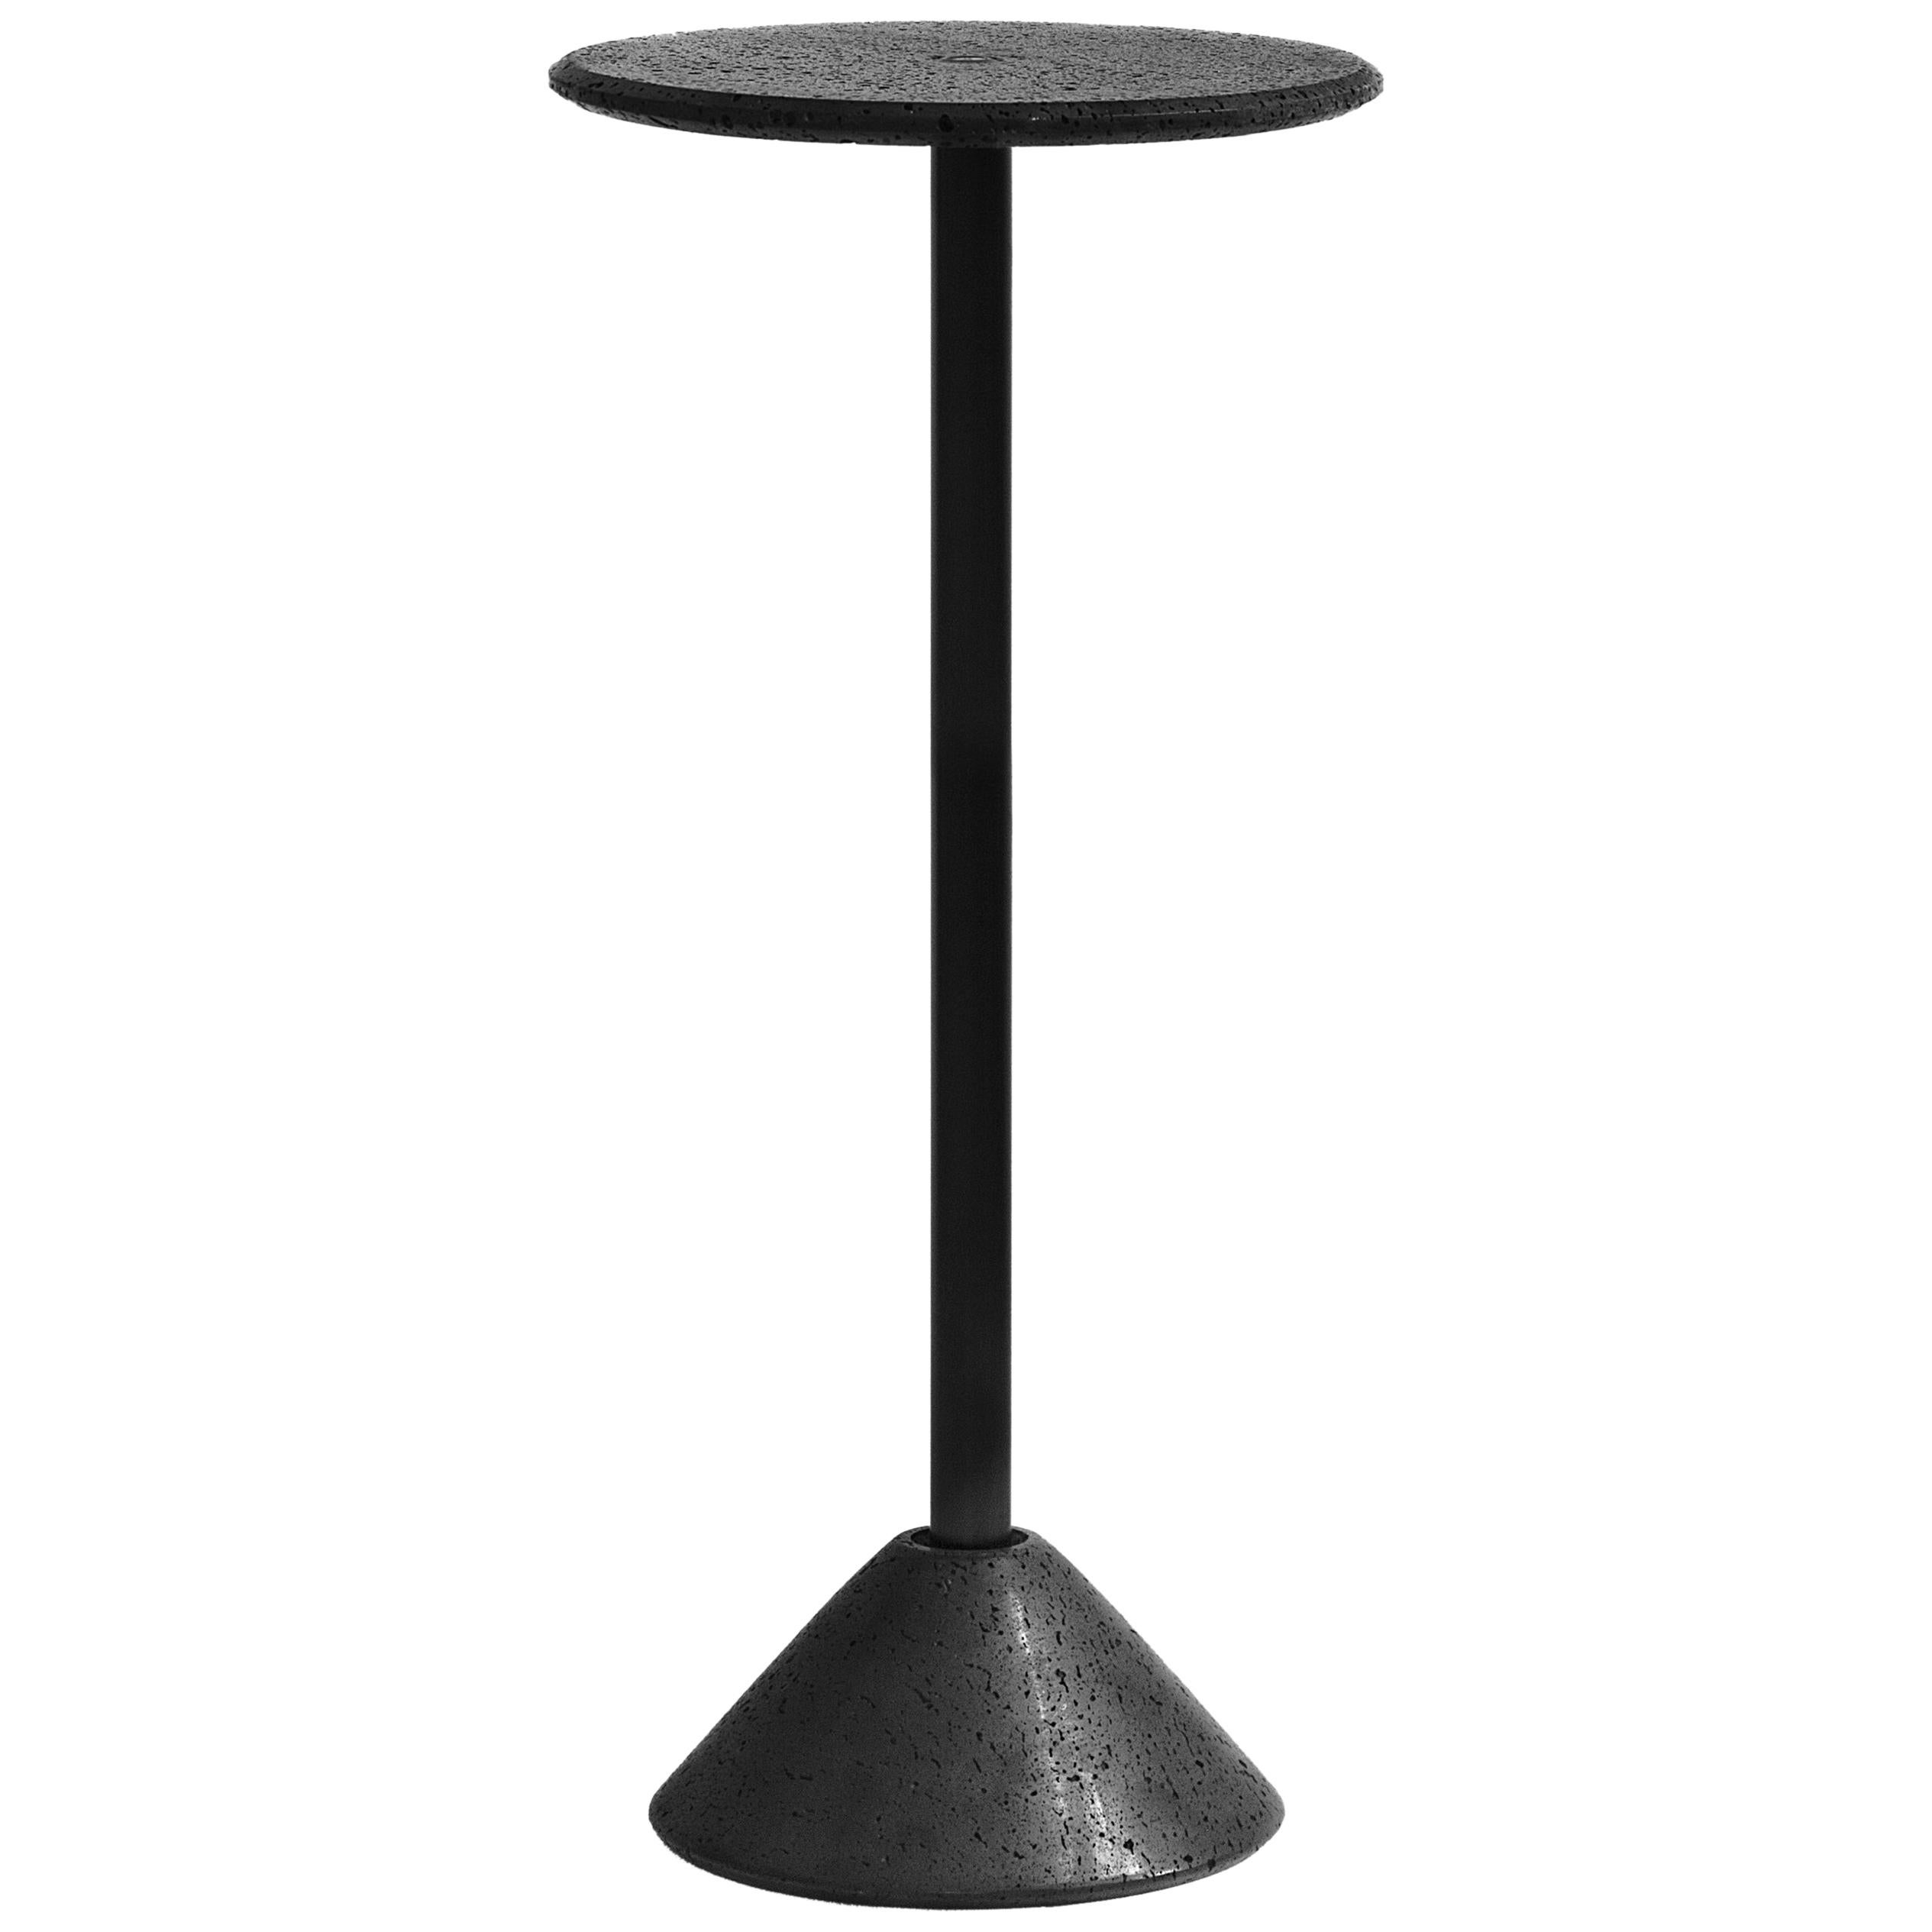 Lava Stone Dinning Table, “Ding, ” T, by Buzao